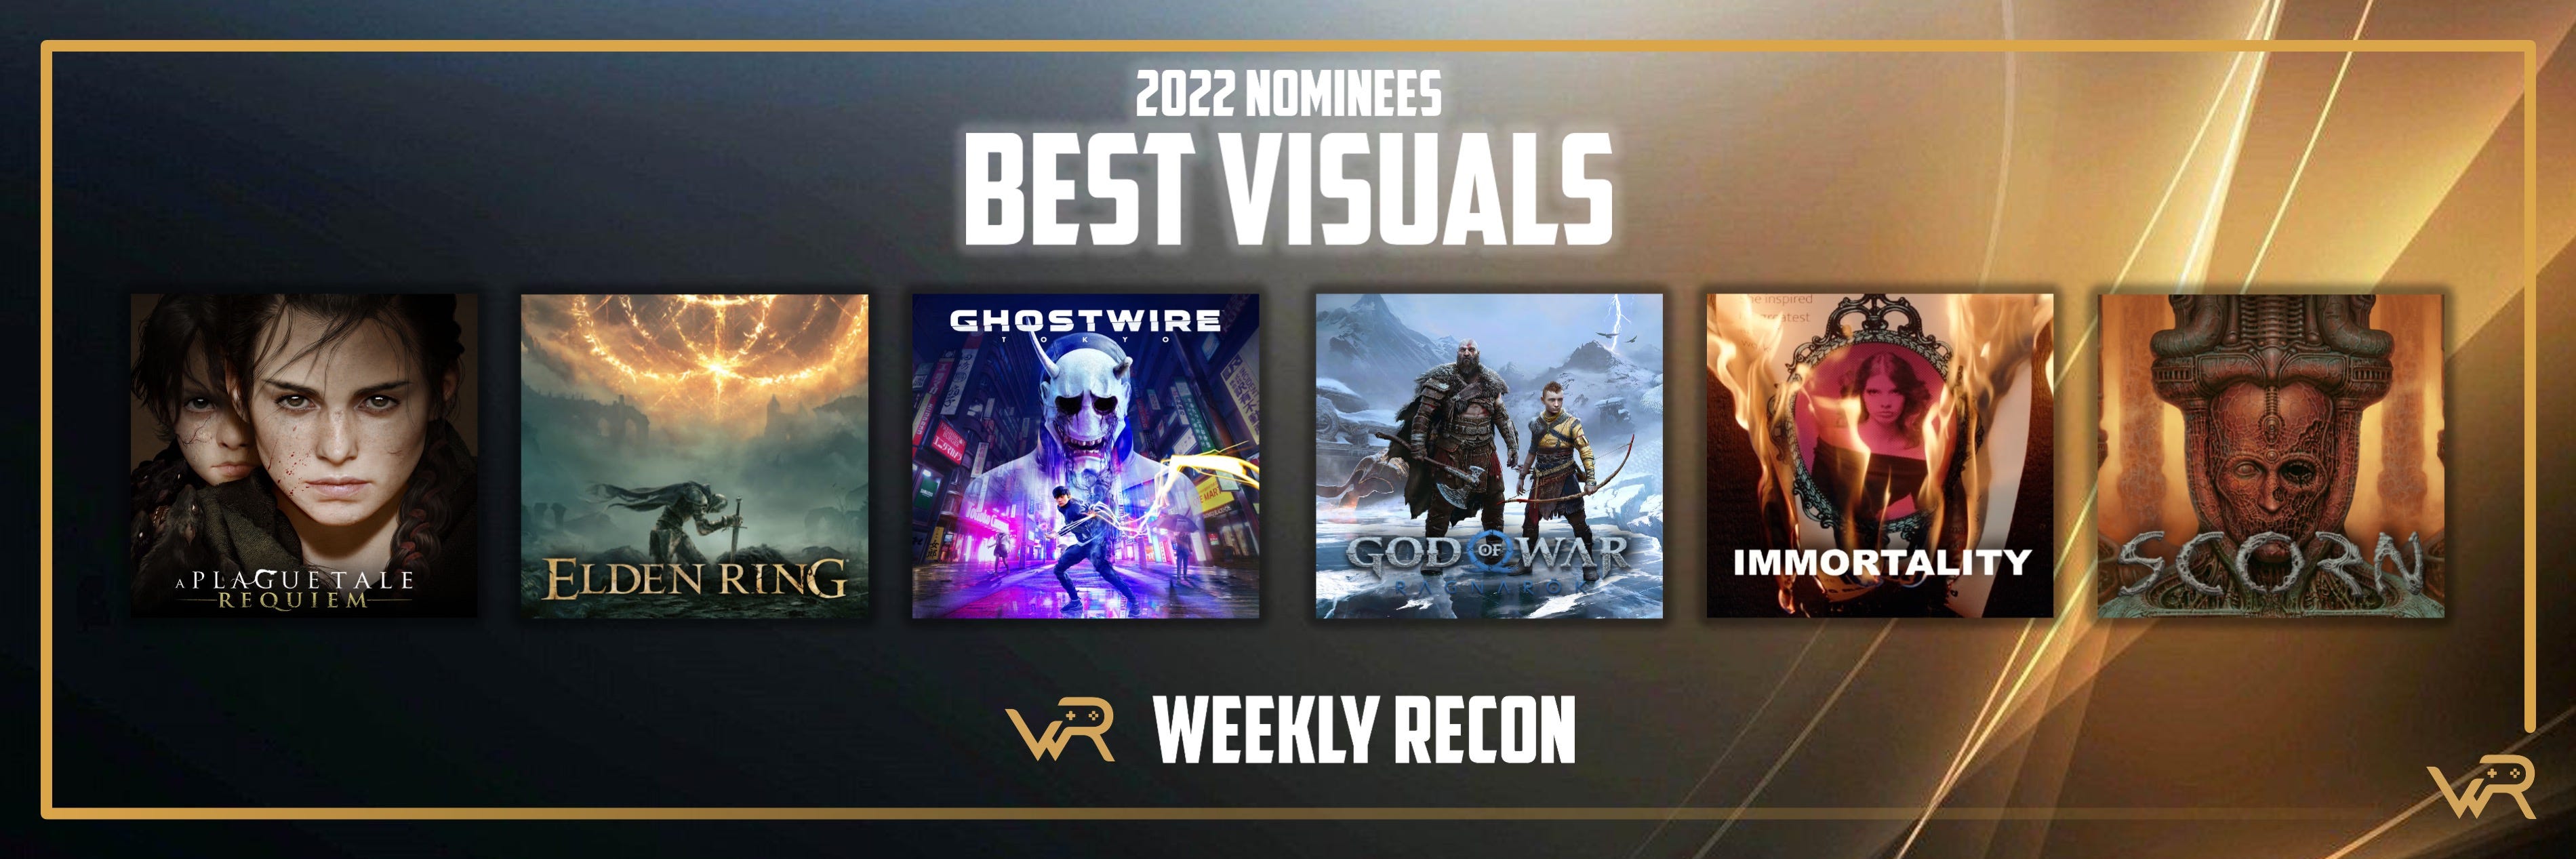 2022 Video Game Awards Season - Tracking and Discussion Thread (New!:  Categories and Genre Winners added) News - Entertainment, Page 45